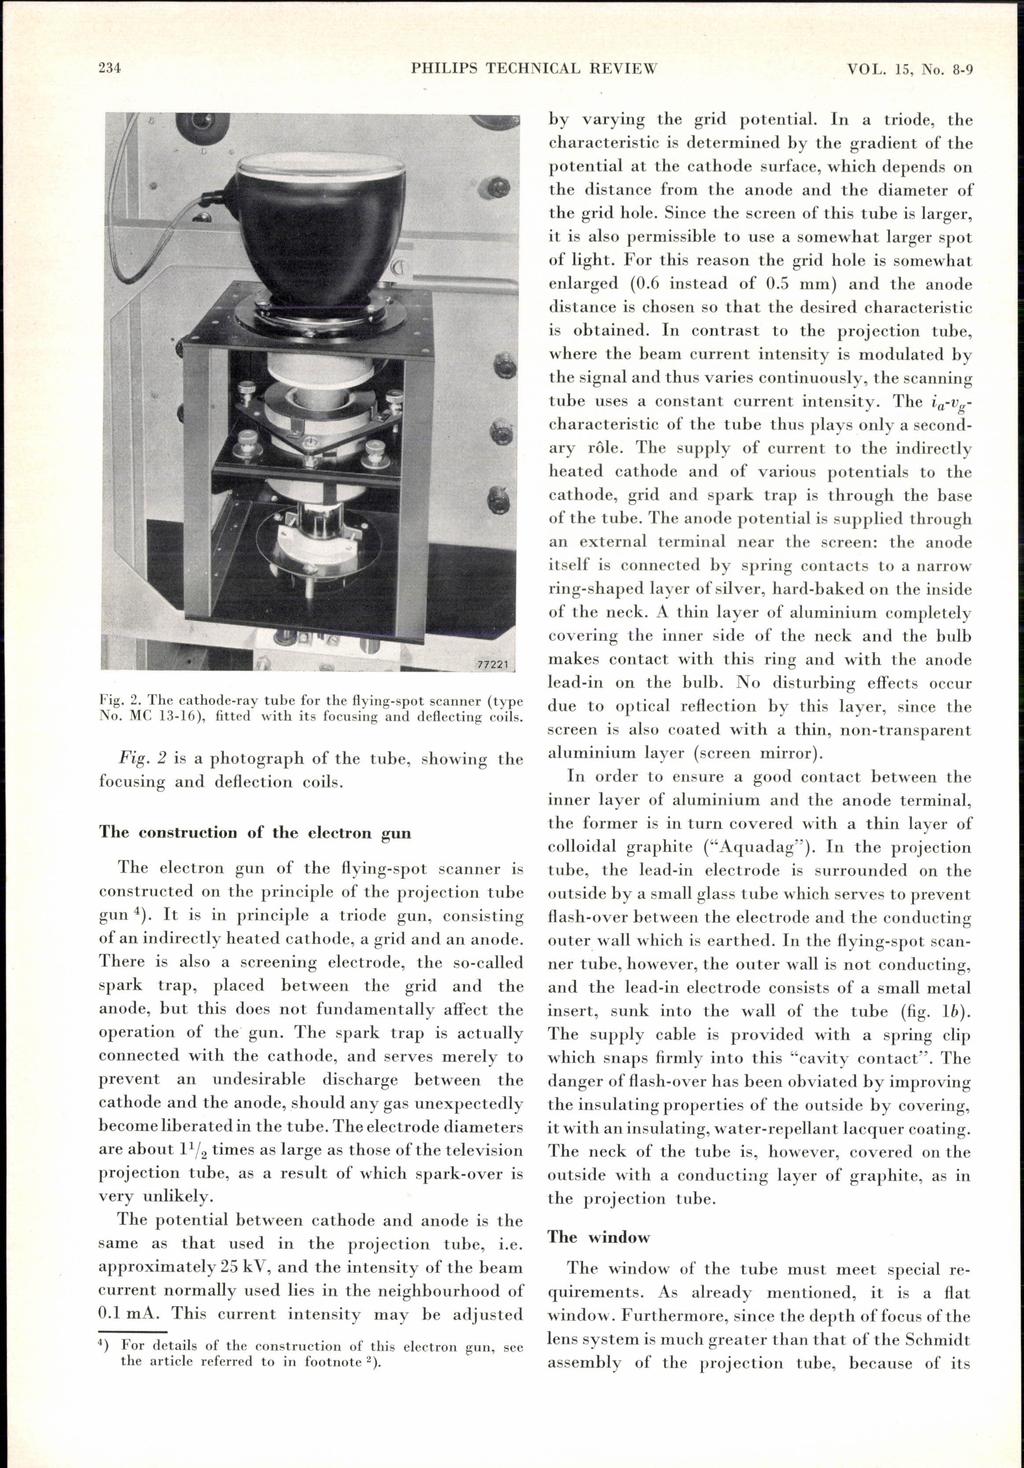 234 PHILIPS TECHNICAL REVIEW VOL. 15, No. 8-9 Fig. 2. The cathode-my tube for the flying-spot scanner (type No. MC 13-16), fitted with its focusing and deflecting coils. Fig. 2 is a photograph of the tube, showing the focusing and deflection coils.